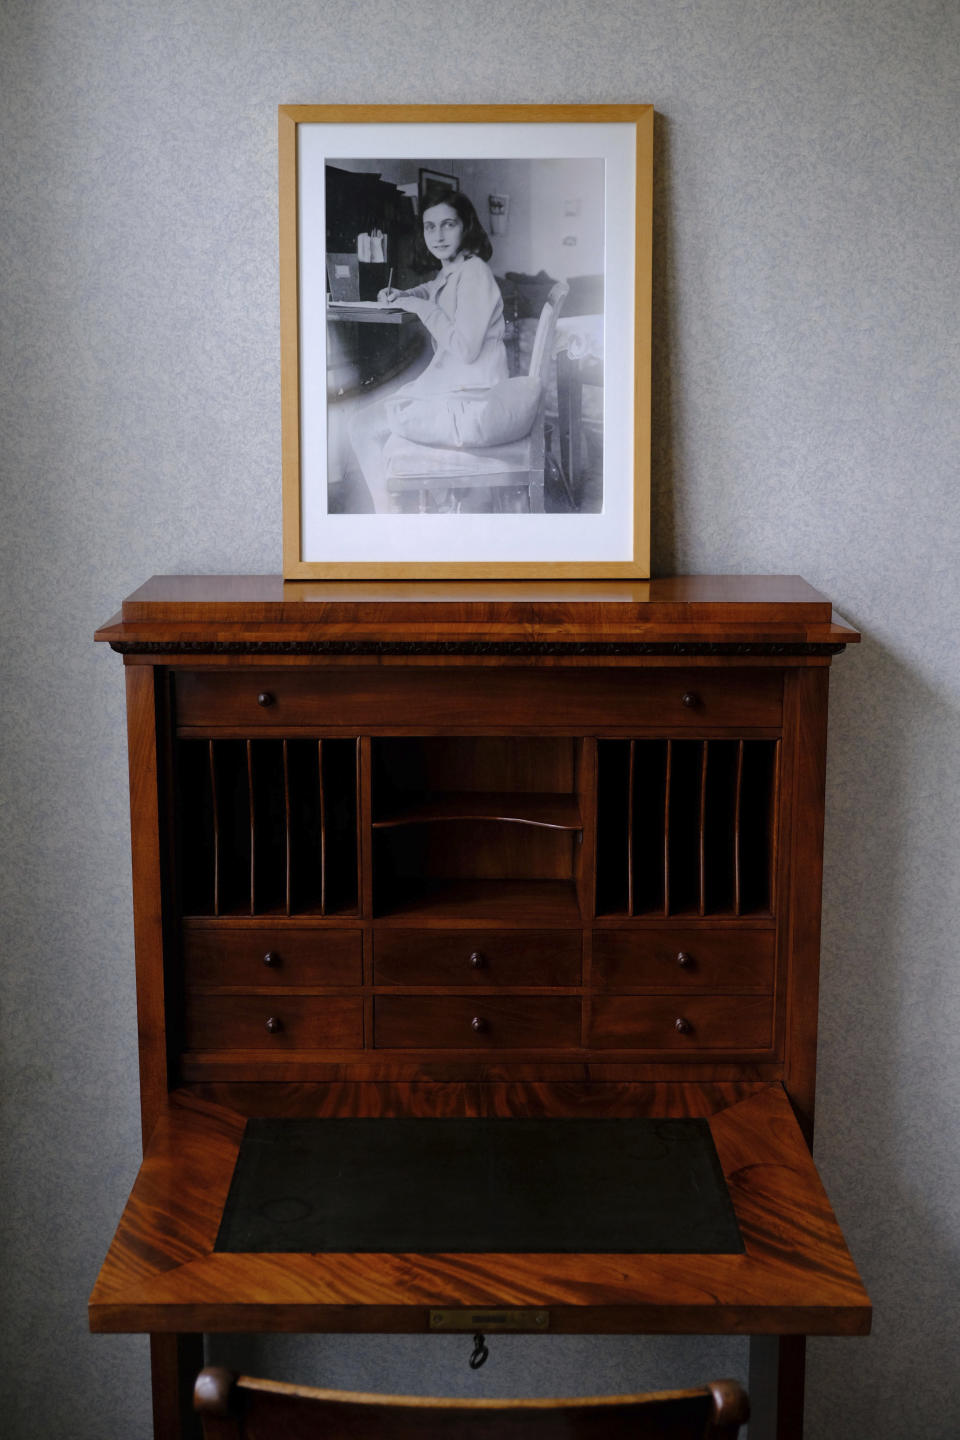 FILE - A photo of Anne Frank stands on a replica of the writing desk she once used in her family's former apartment in Amsterdam, during an event to mark what would have been Anne Frank's 90th birthday, in Amsterdam, Netherlands, Wednesday, June 12, 2019. A group of Dutch historians has published an in-depth criticism of the work and conclusion of a cold case team that said it had pieced together the “most likely scenario” of who betrayed Jewish teenage diarist Anne Frank and her family. (AP Photo/Michael C. Corder, File)